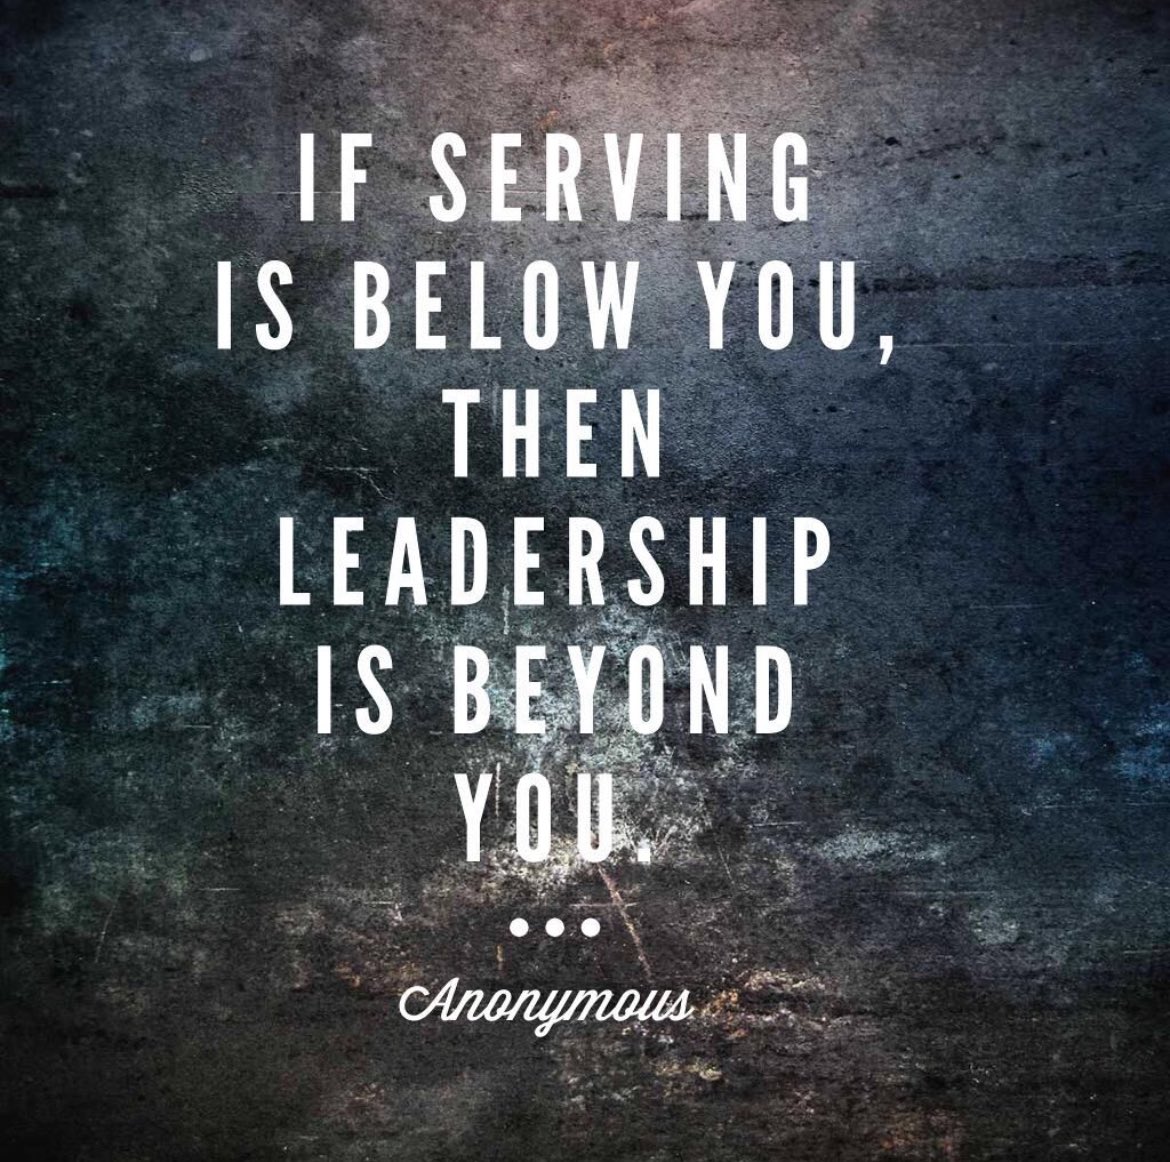 Mentoring Wednesday! “Servant-leadership is all about making the goals clear, and then rolling your sleeves up and doing whatever it takes to help people win.” - Ken Blanchard #mentoring #leadership #winning #goodtogreat #servant #goals #peoplefocused #execution